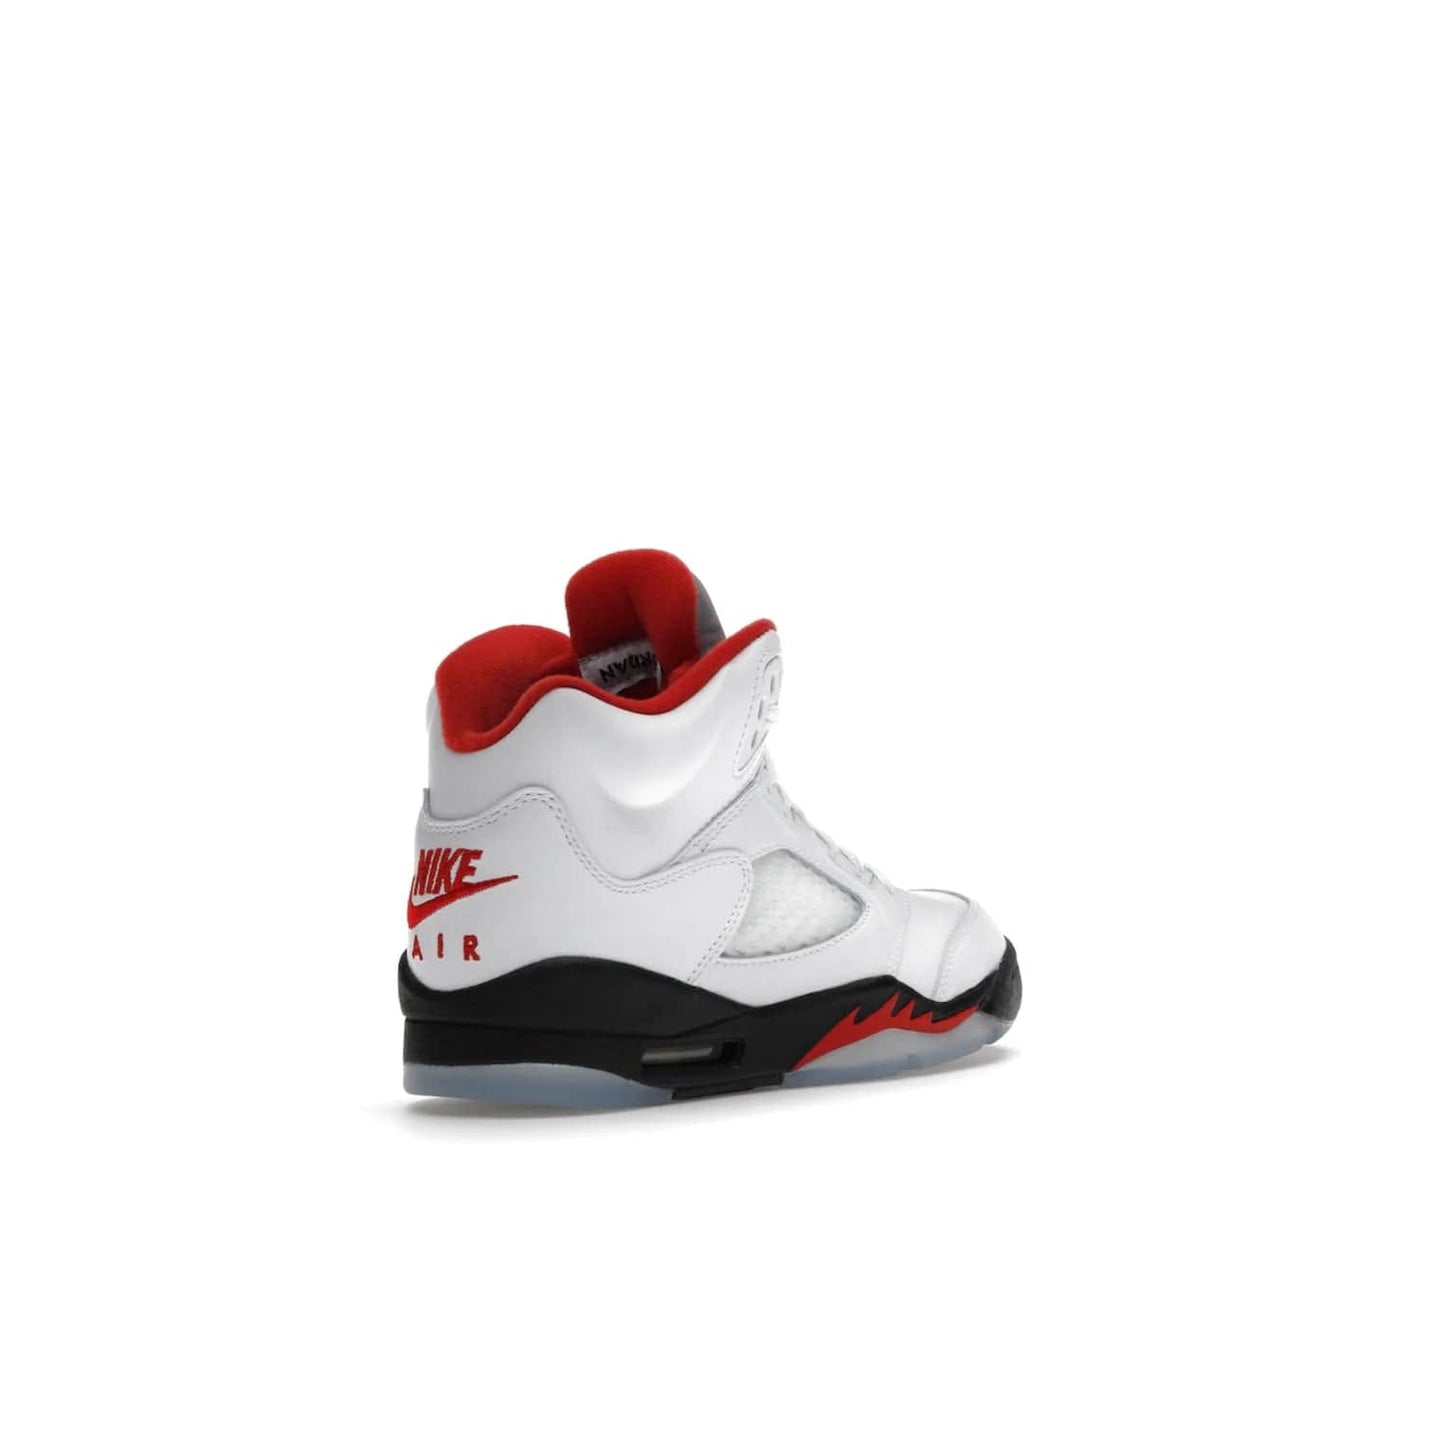 Jordan 5 Retro Fire Red Silver Tongue (2020) (GS) - Image 32 - Only at www.BallersClubKickz.com - A stylish option for any grade schooler. The Air Jordan 5 Retro Fire Red Silver Tongue 2020 GS features a combination of four hues, premium white leather, a clear mesh mid-upper and a reflective silver tongue. An icy translucent blue outsole completes the look. Available on May 2, $150.